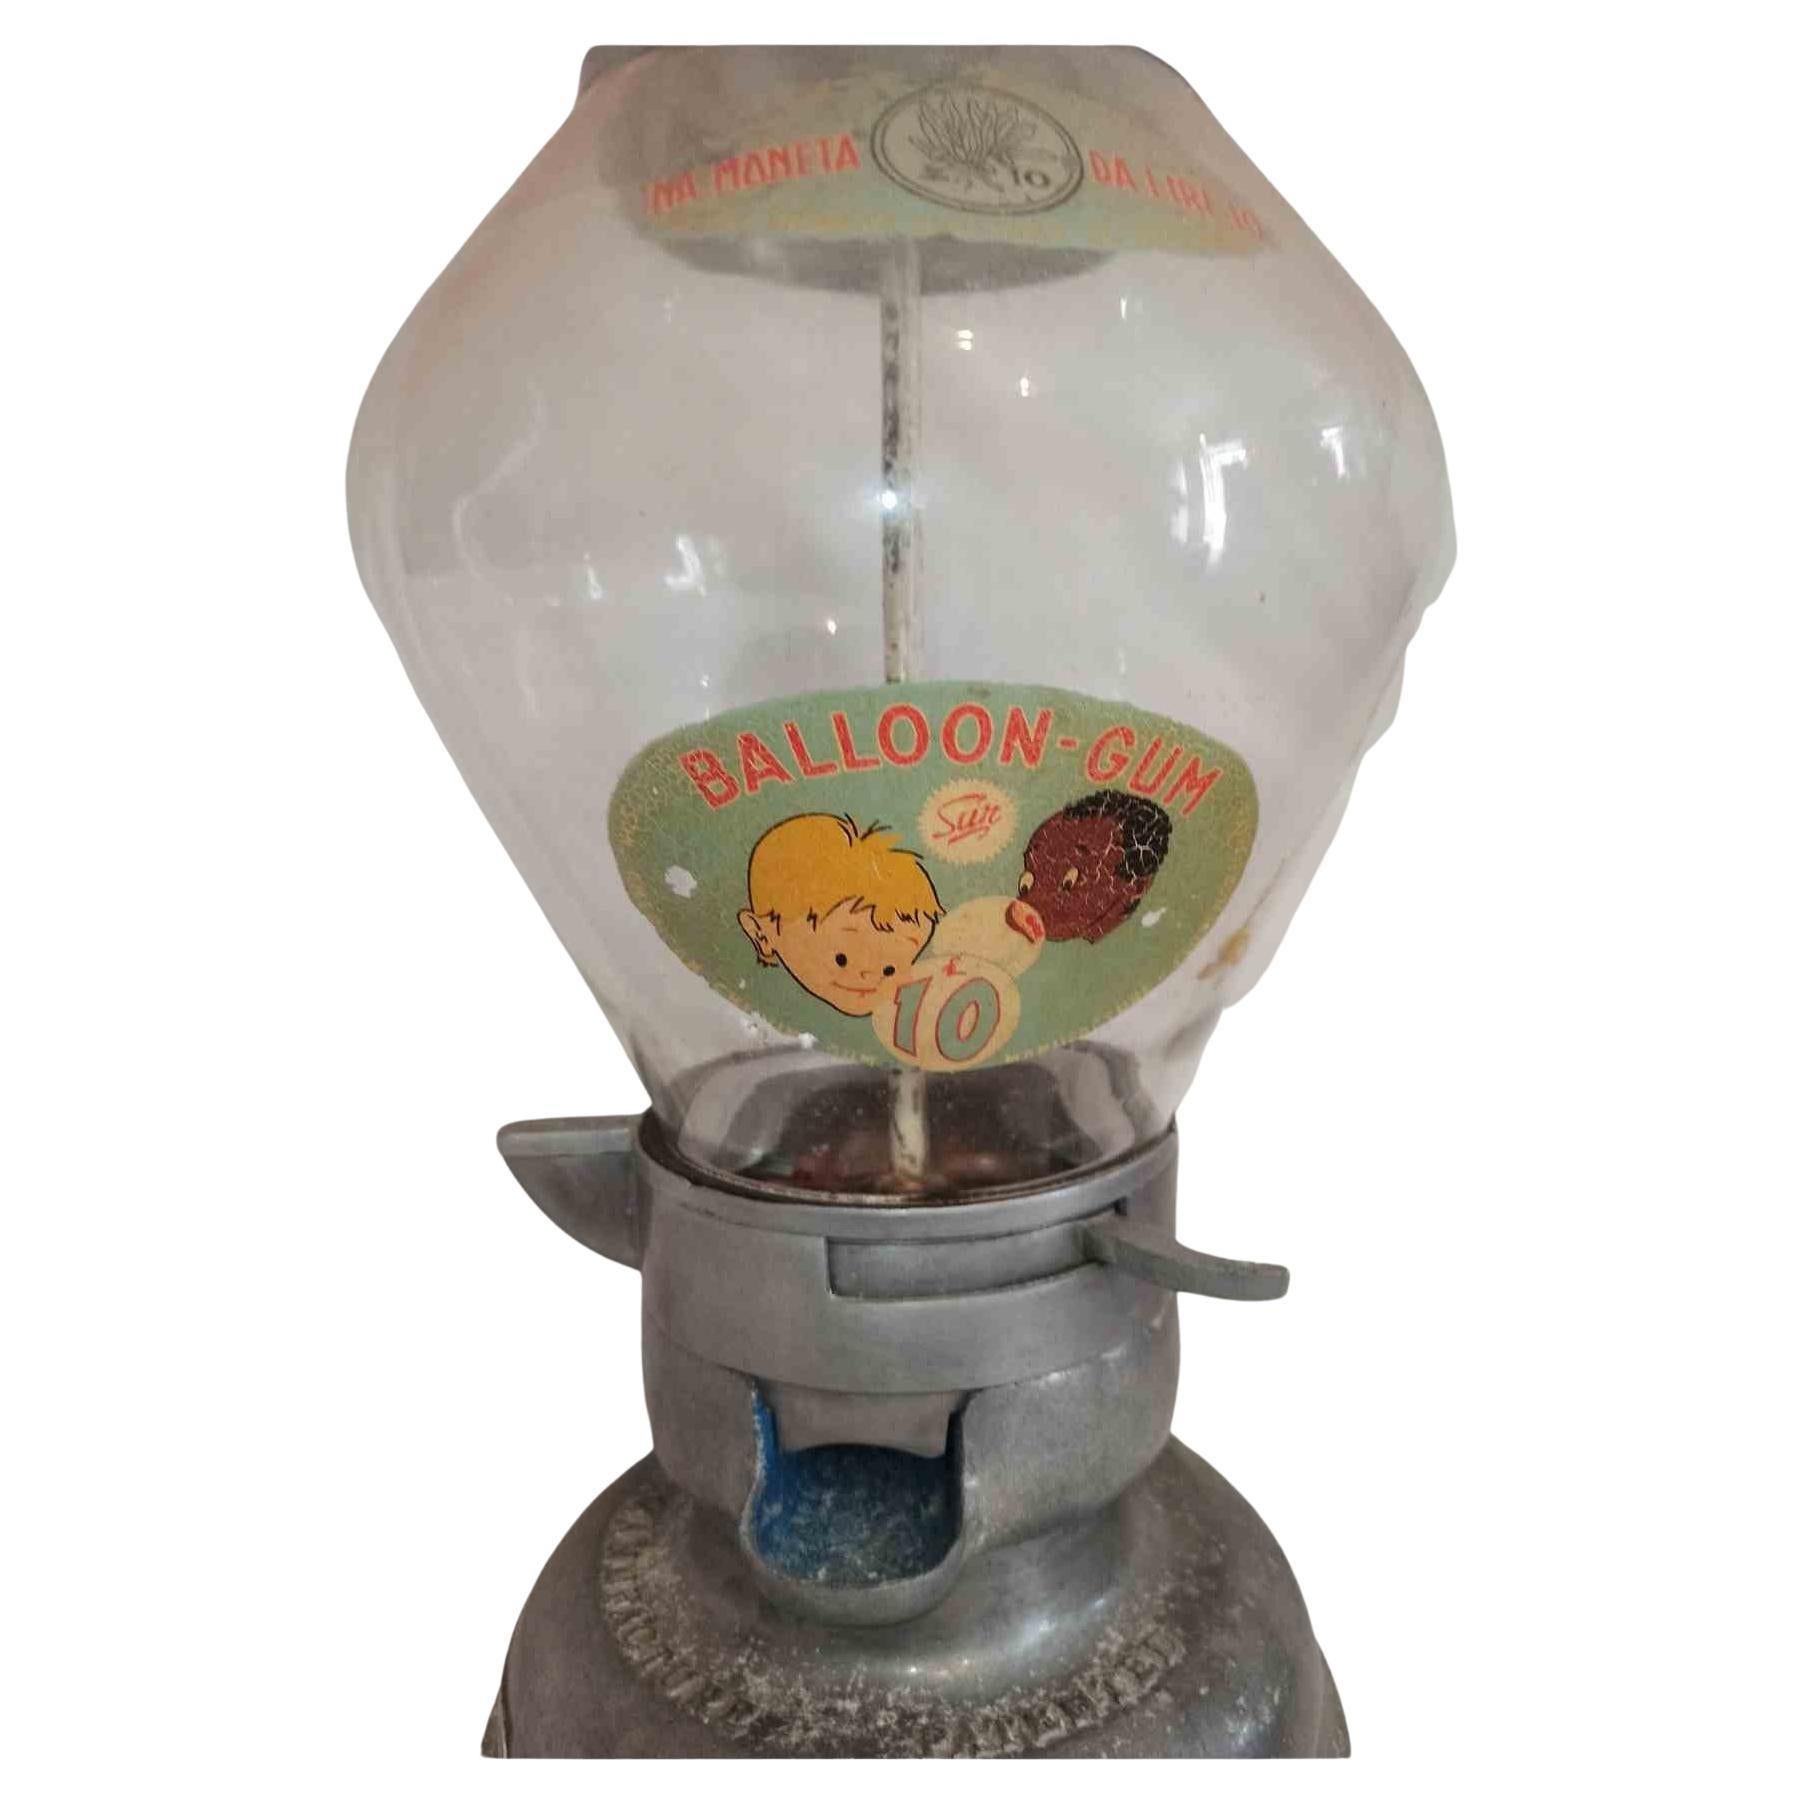 Vintage Chewing Gum Dispenser, Italy 1930s.

Excellent condition, working.